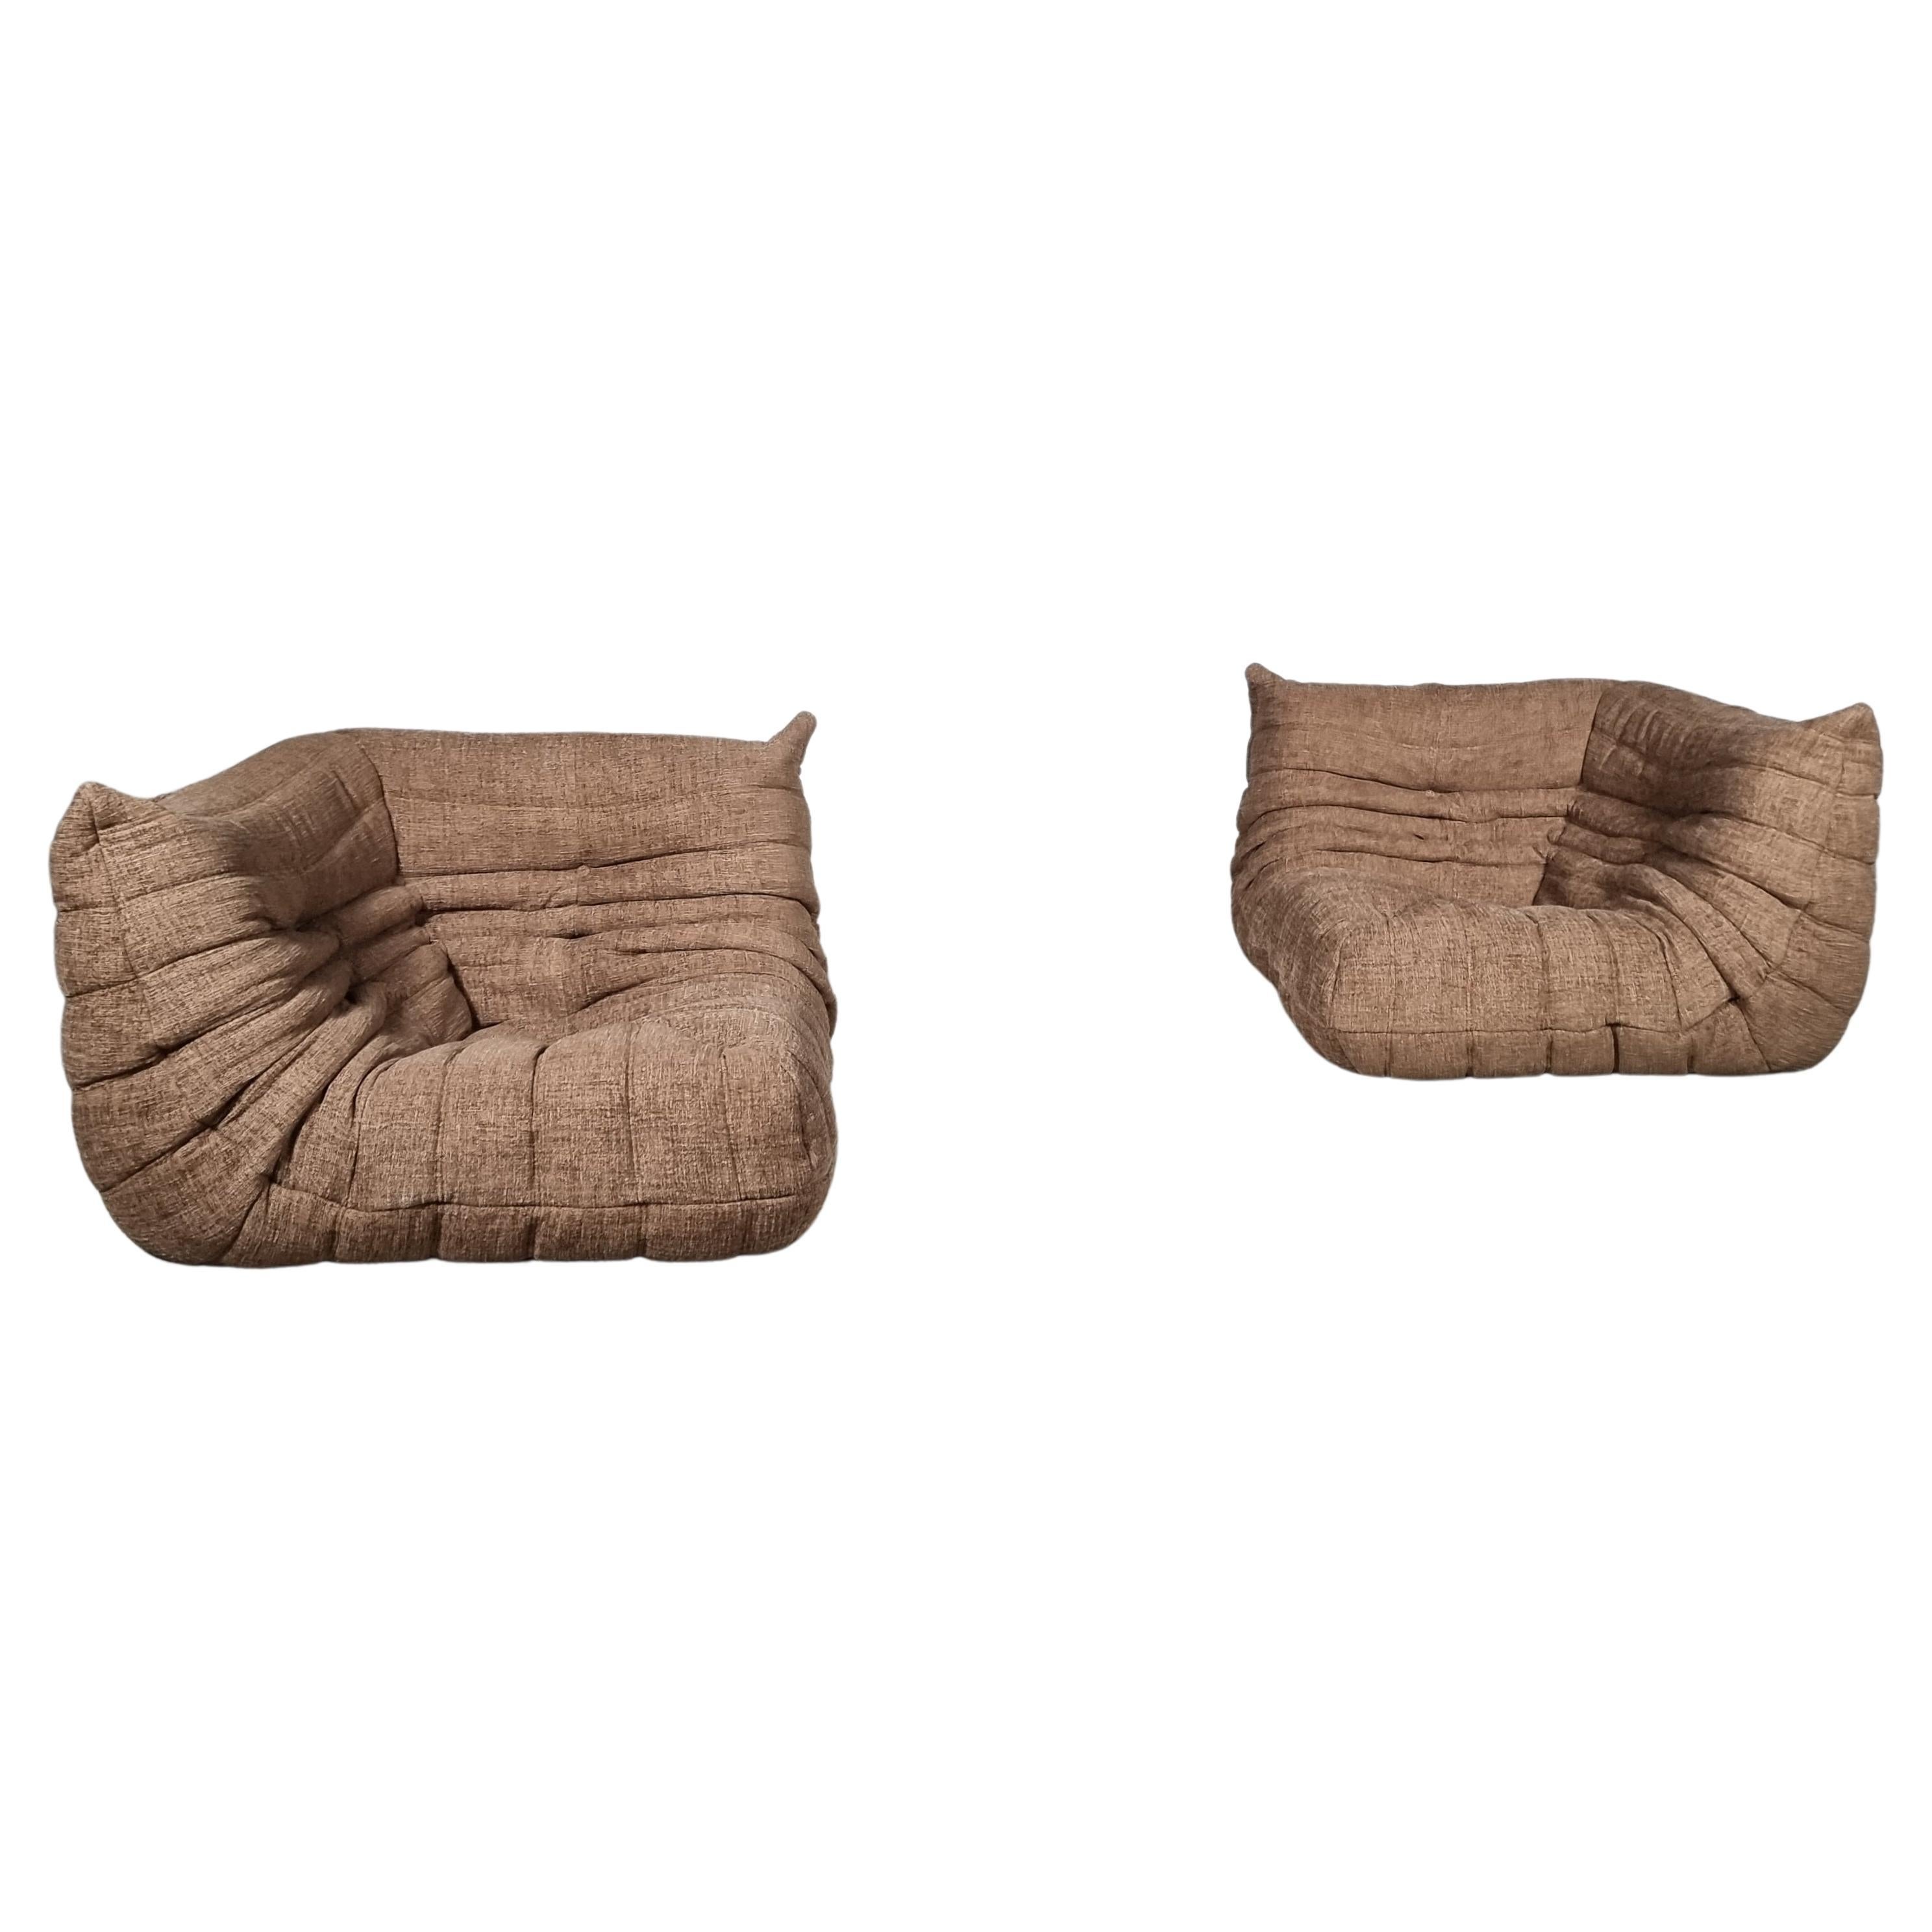 Togo Lounge Chairs by Michel Ducaroy for Ligne Roset, circa 1970s